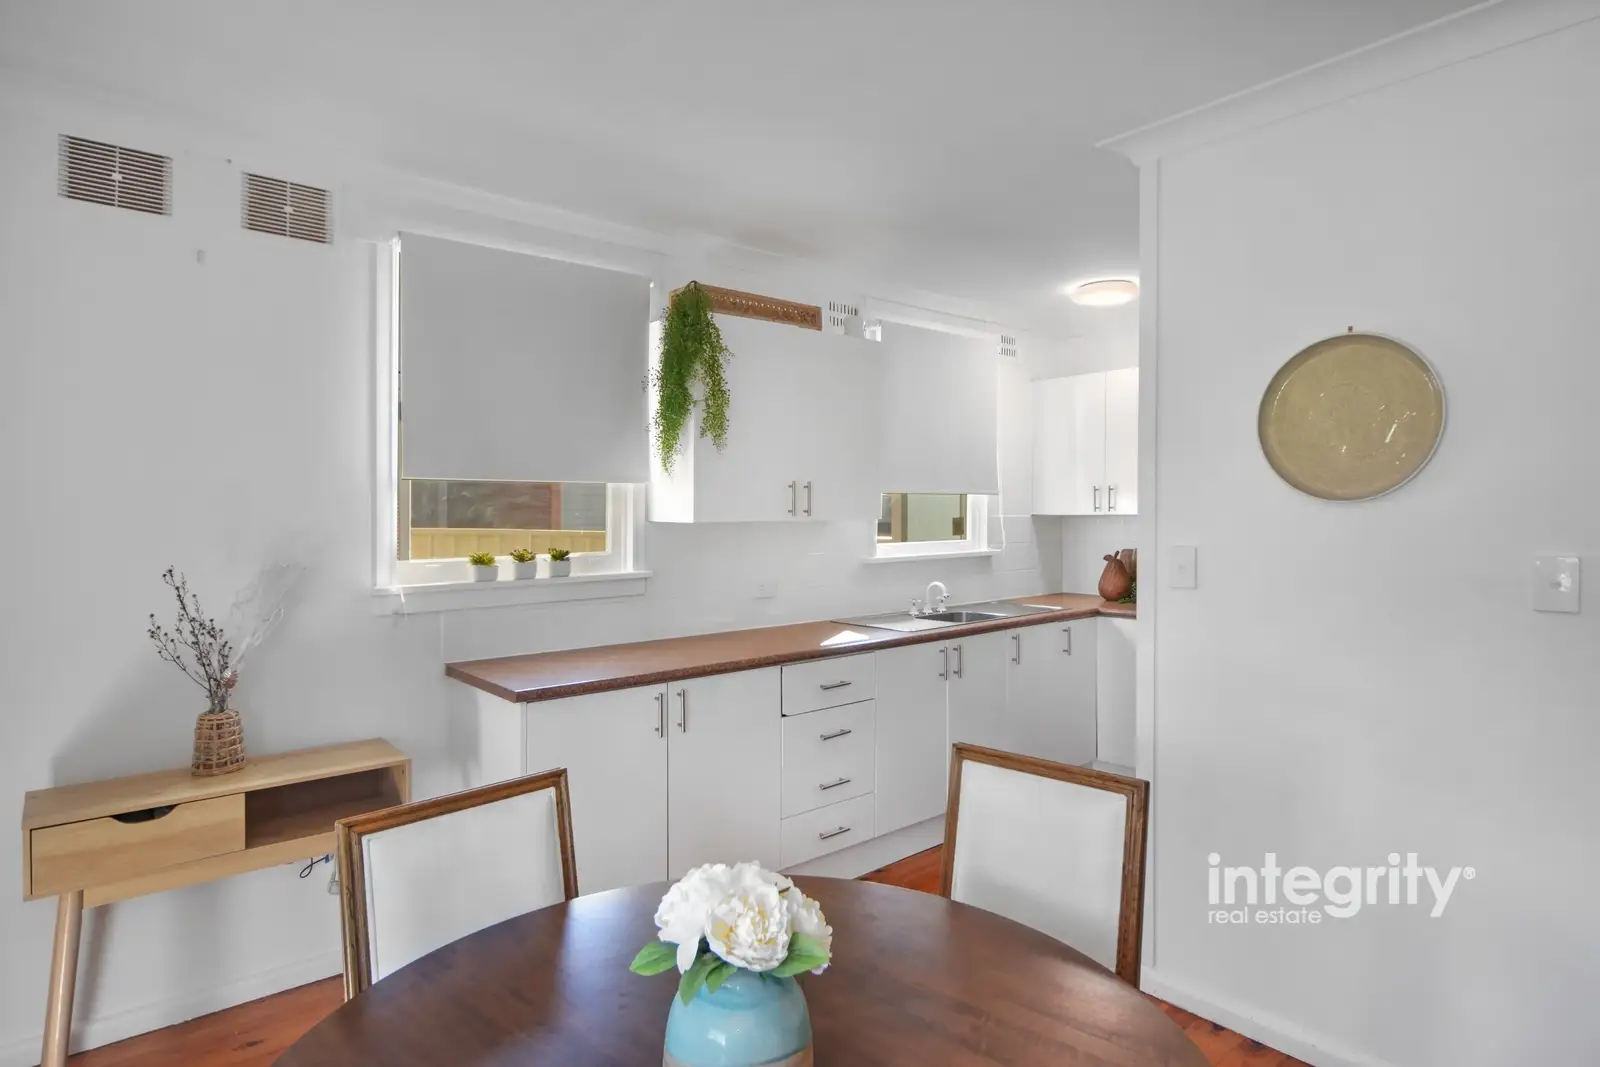 35 Quickmatch Street, Nowra For Sale by Integrity Real Estate - image 3